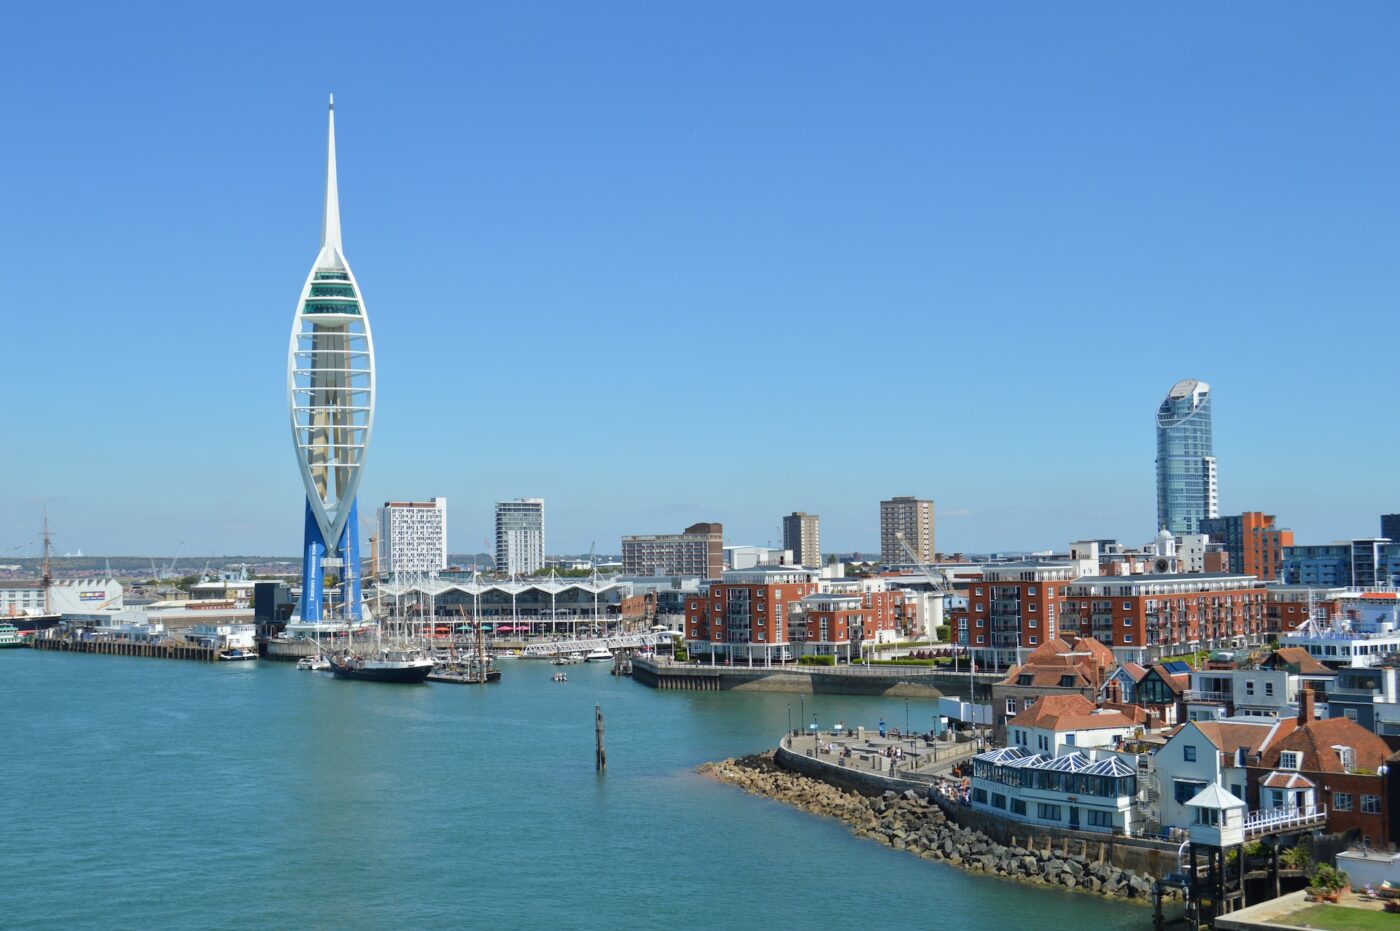 Digital devices with a picture of the Spinnaker Tower at Portsmouth.